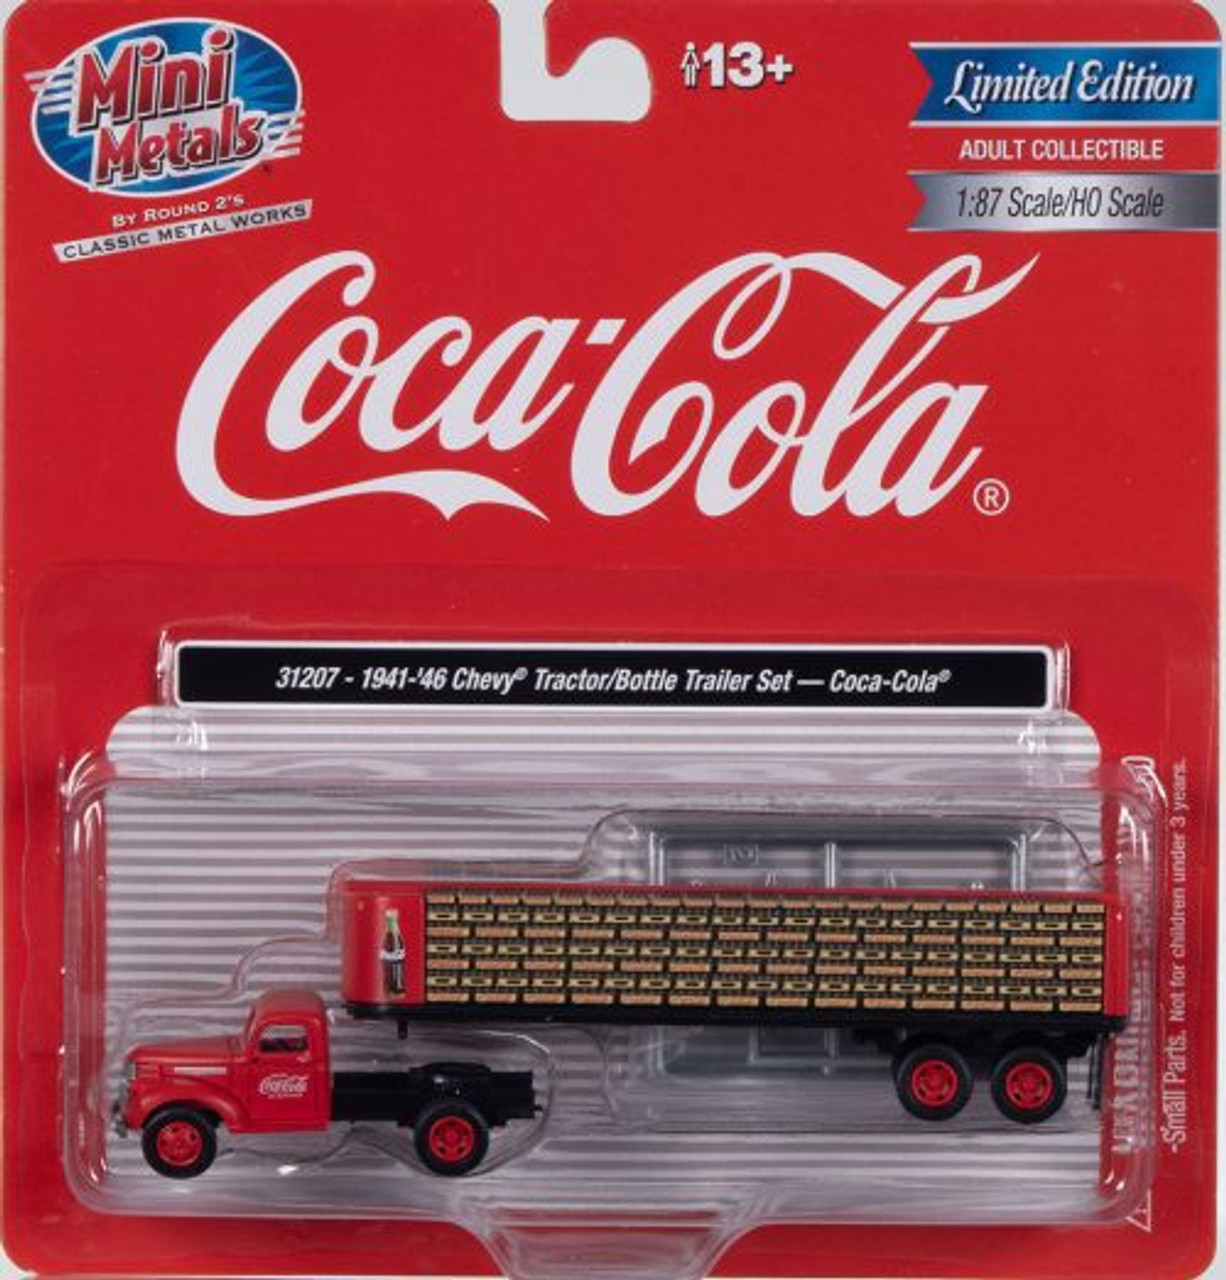 Classic Metal Works 31207 HO 1941-1946 Chevrolet Tractor w/Flatbed Trailer with Bottles Coca-Cola Package